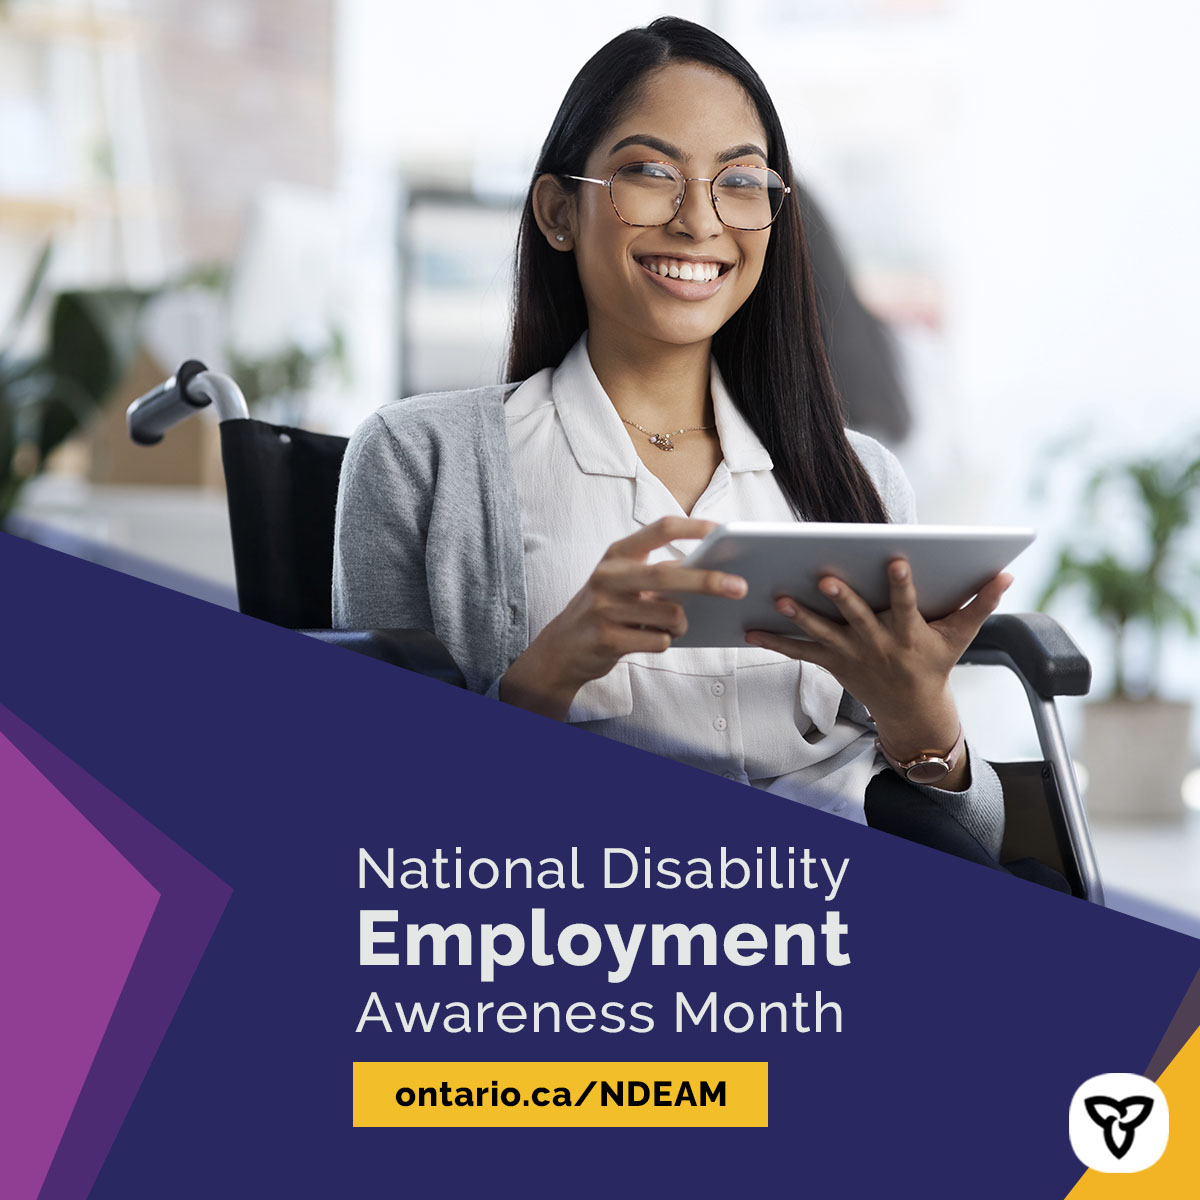 A wheelchair user smiling and holding a tablet. Text reads: National Disability Employment Awareness Month ontario.ca/NDEAM